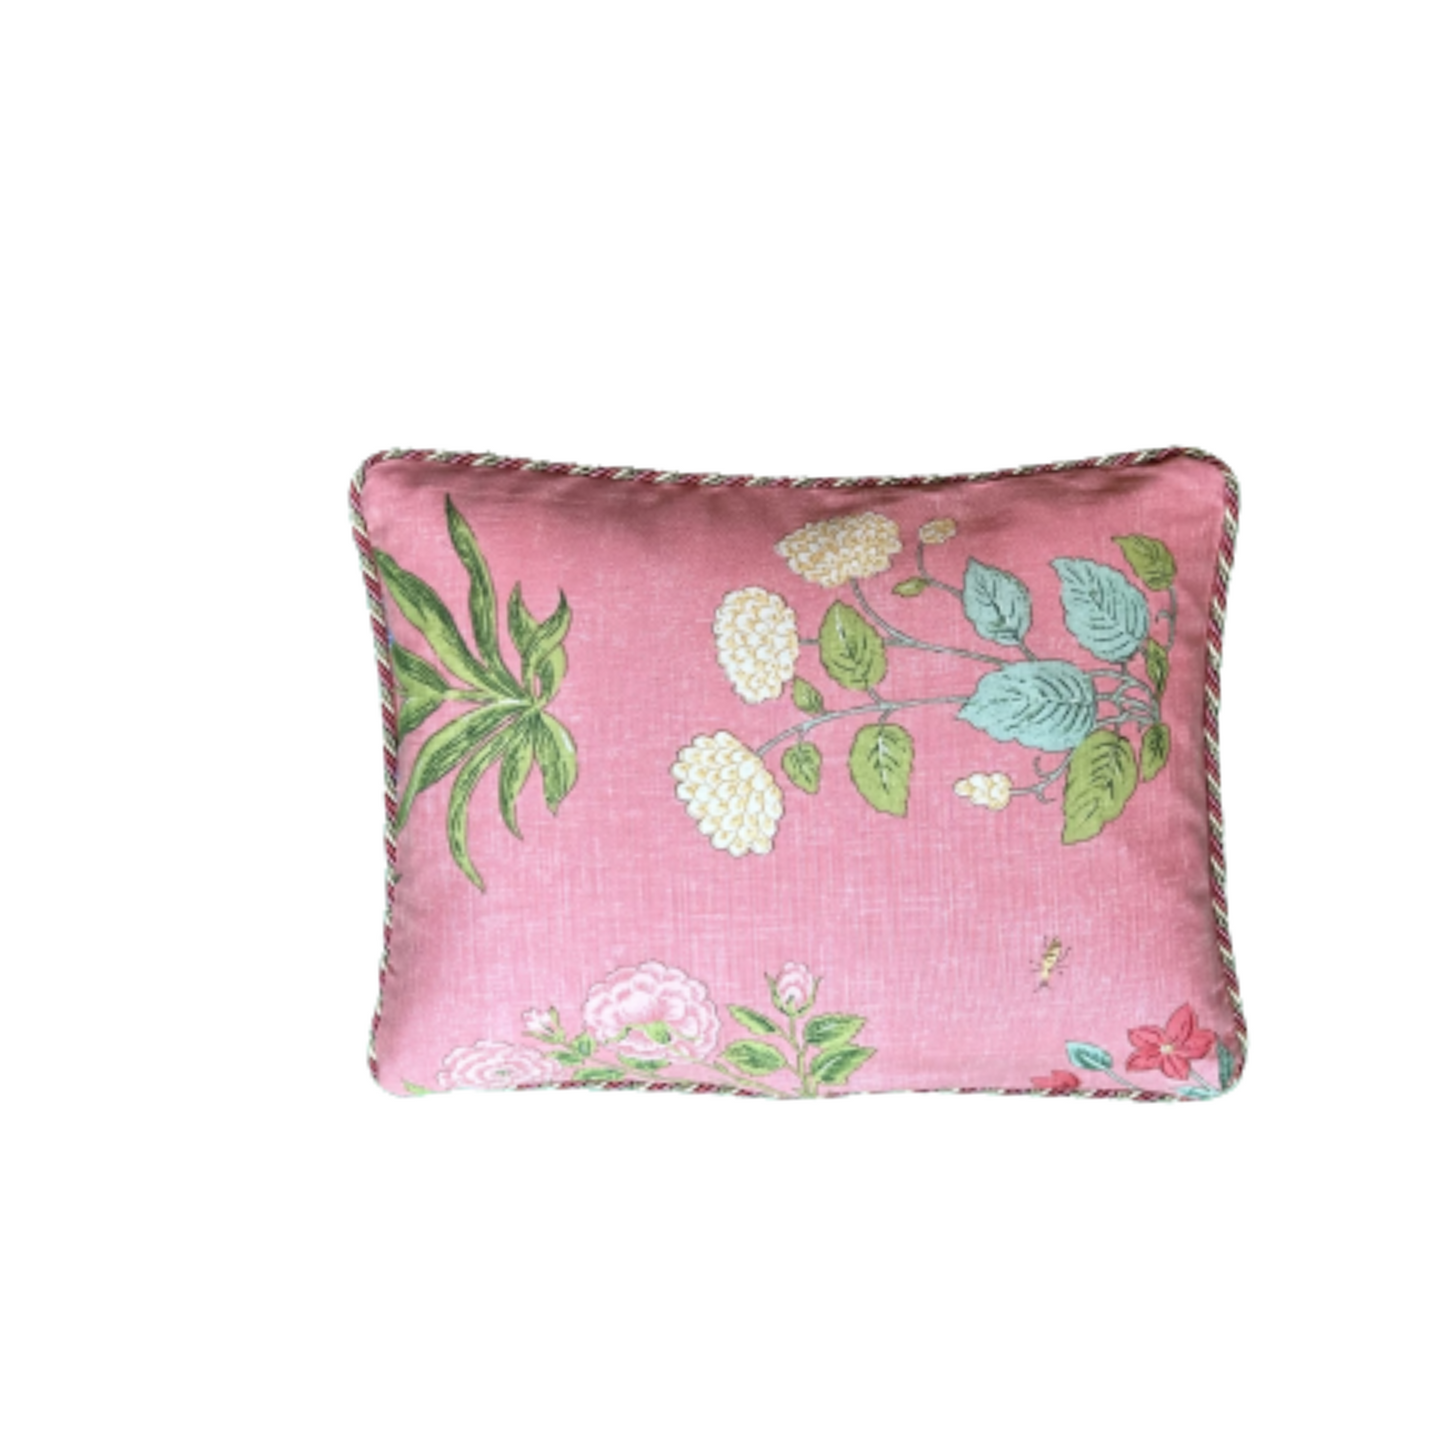 Scalamandre Botanica Reversible 12 x 16 Decorative Pillow with Down Feather Insert